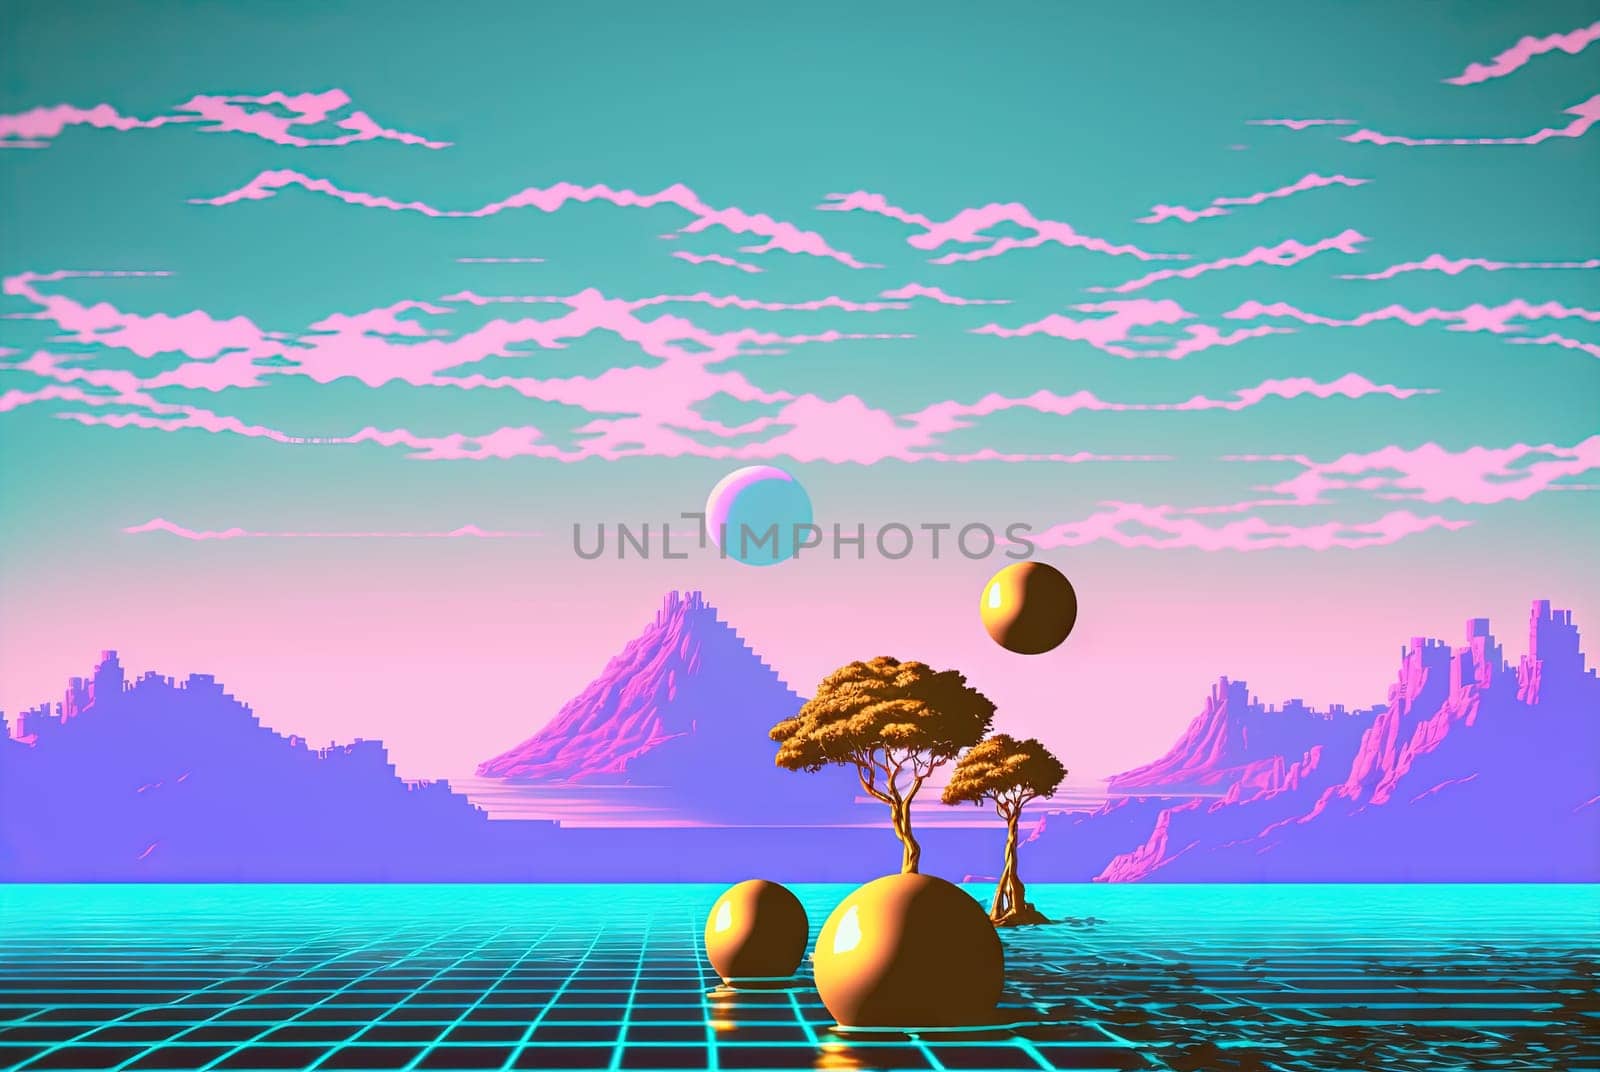 Abstract vaporwave scene with golden ball on the landscape with mountains. 80s styled pink and blue surreal composition. Generated AI